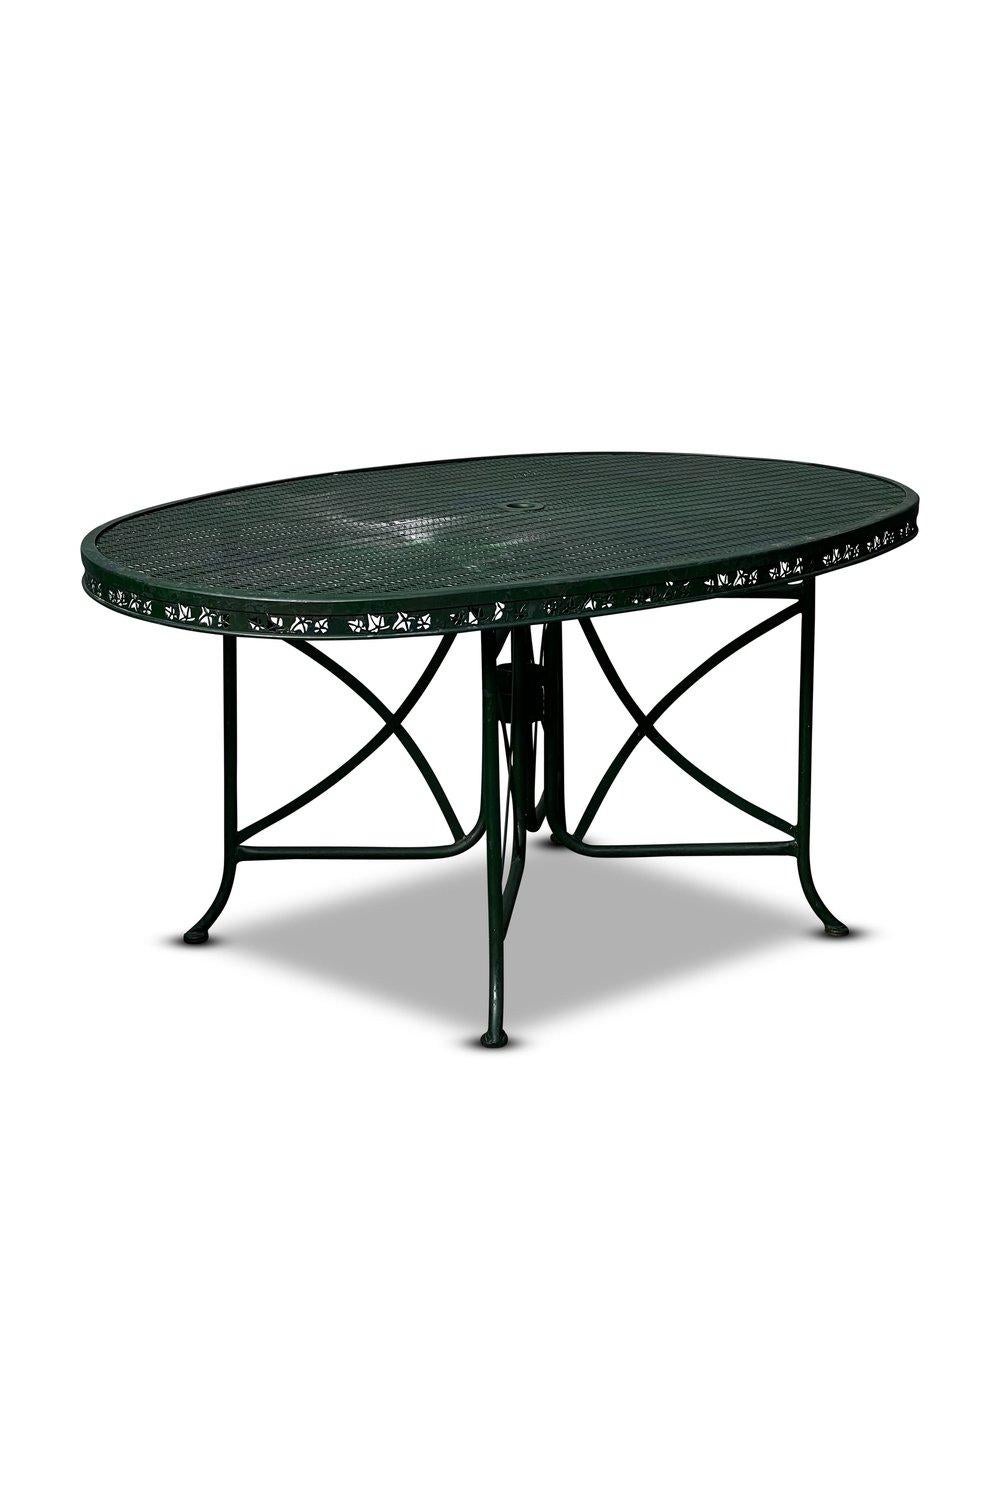 American Vintage Green Wrought Iron Table and Chairs For Sale